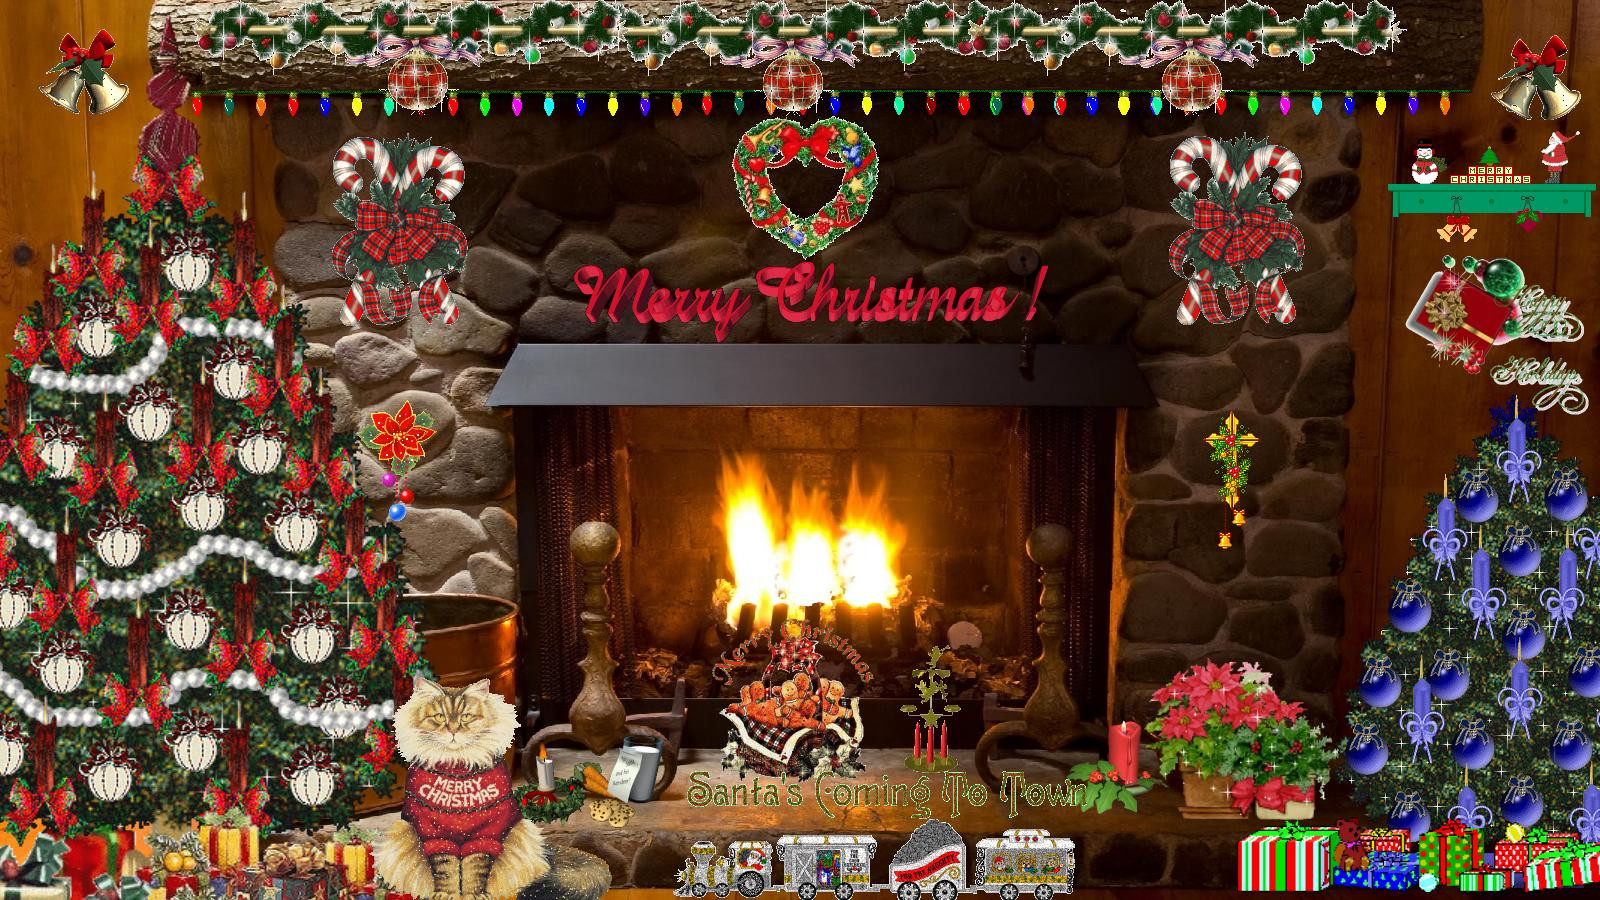 Christmas Background Fireplace
 Dreamscapes Animated Wallpaper WallpaperSafari